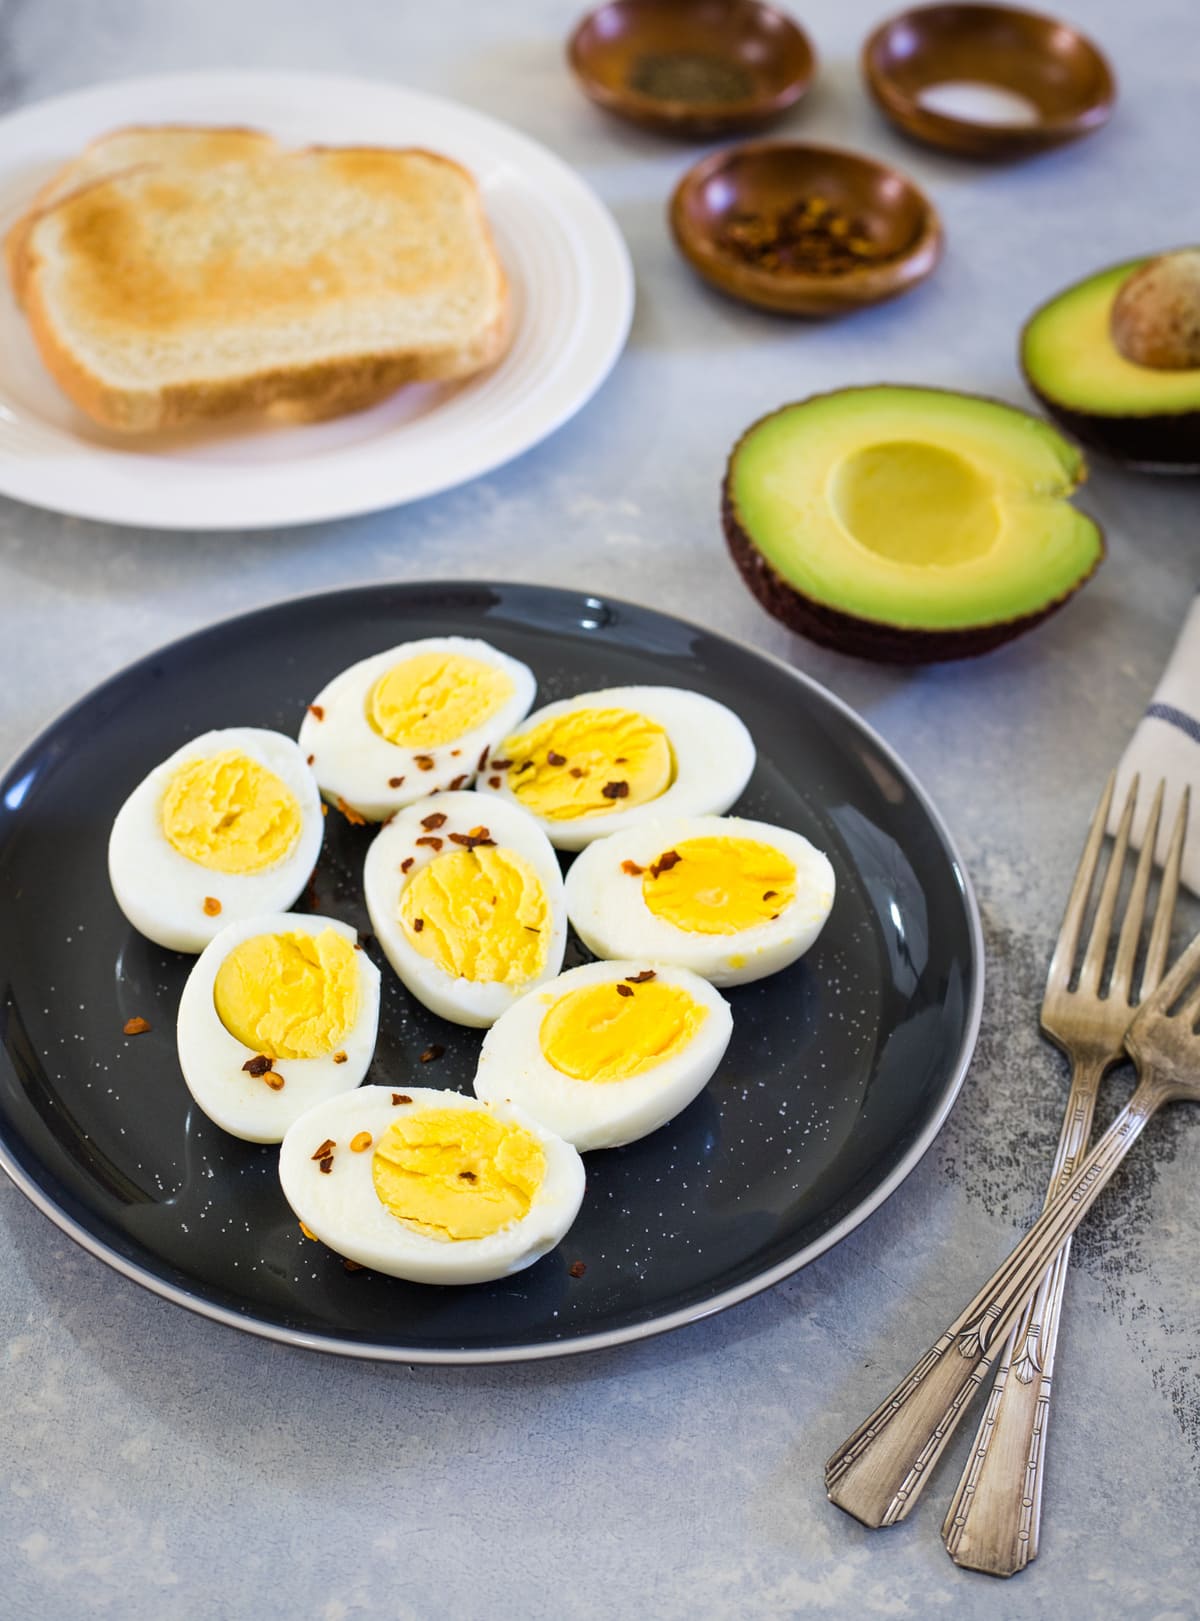 Hard boiled eggs on a black plate sprinkled with red pepper flakes